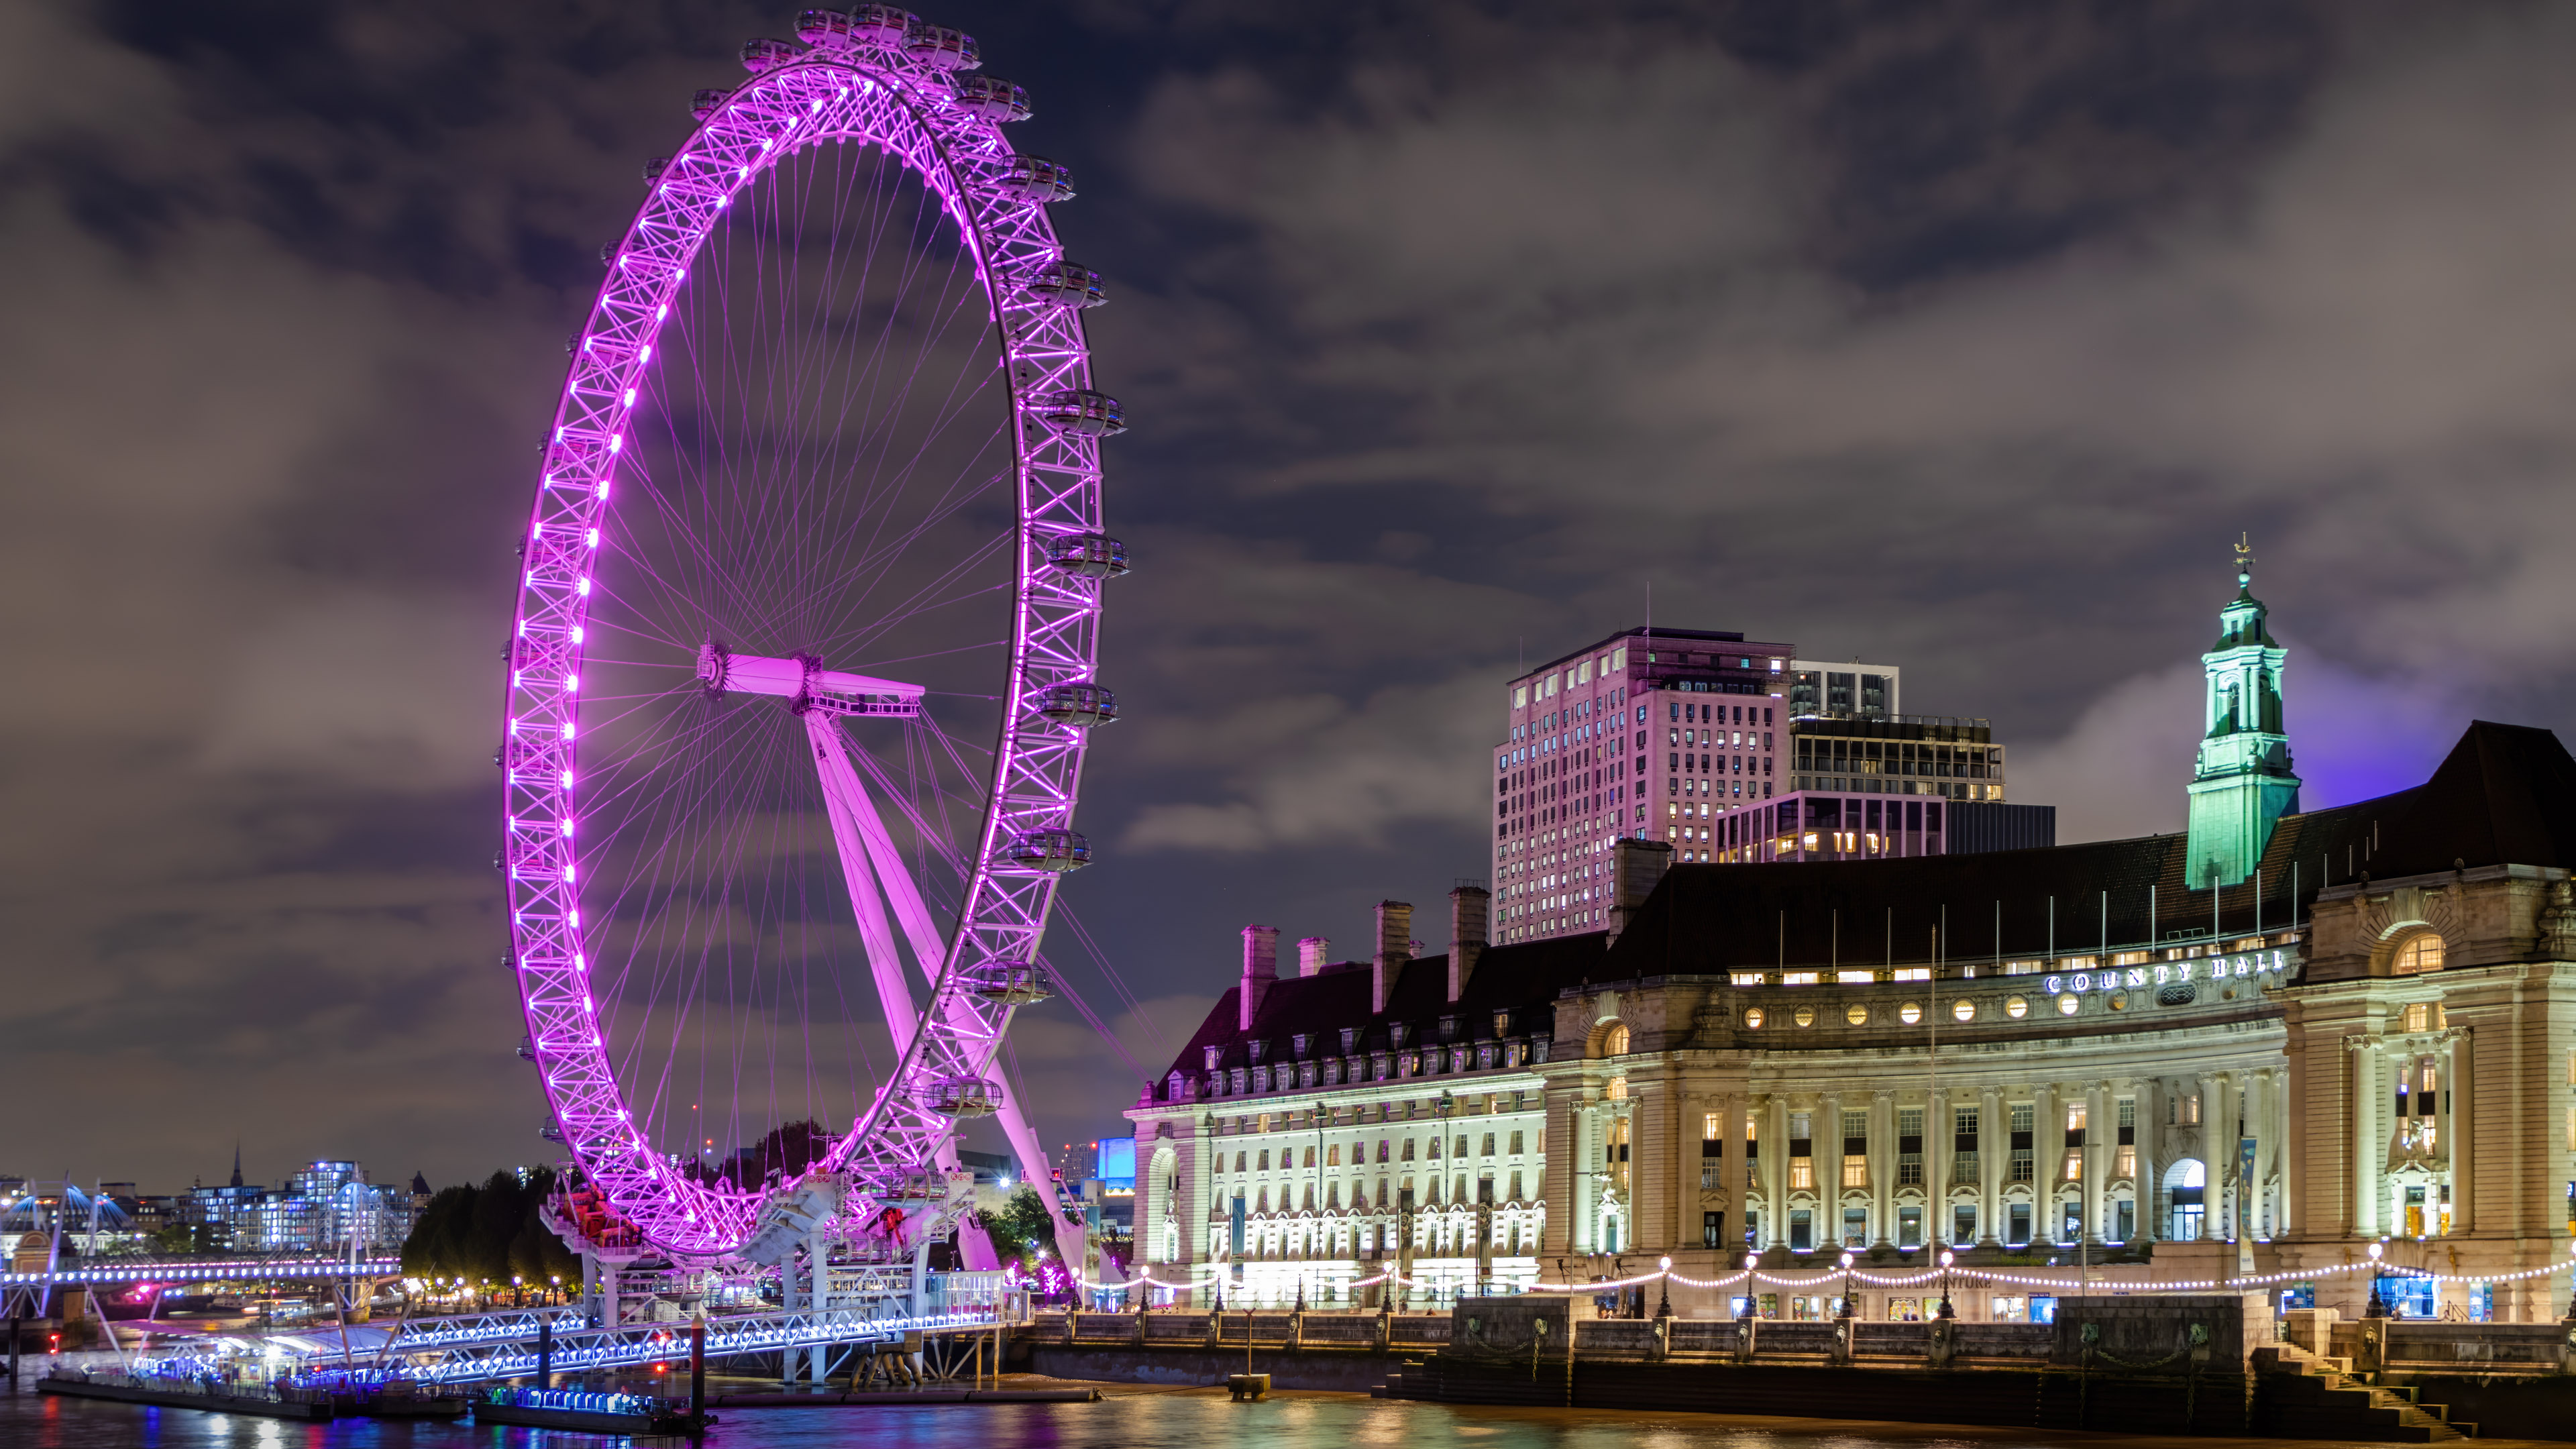 This stunning image captures the essence of London Eye at night. Use it as your desktop or phone wallpaper to bring the beauty of the city to your screen.